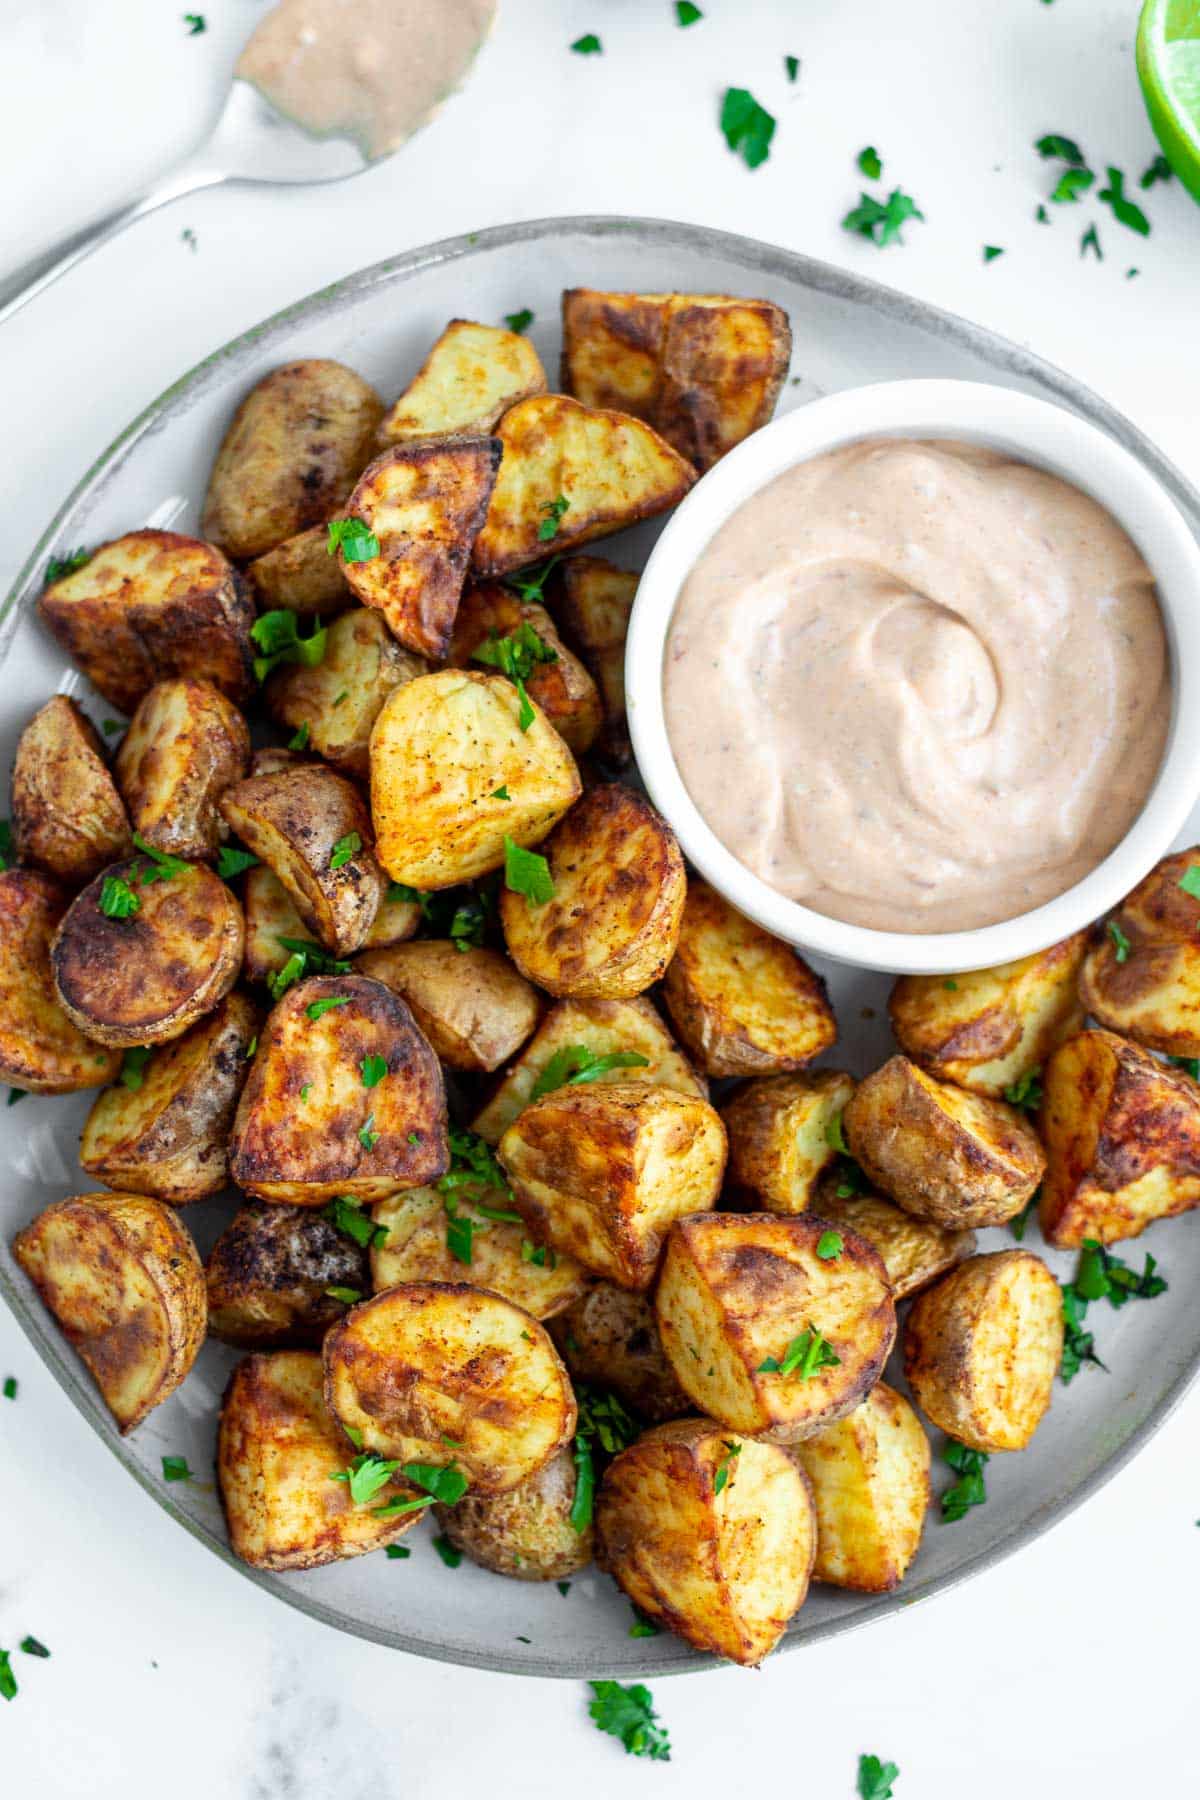 A plate of air fryer roasted potatoes with a small bowl of chipotle mayo.